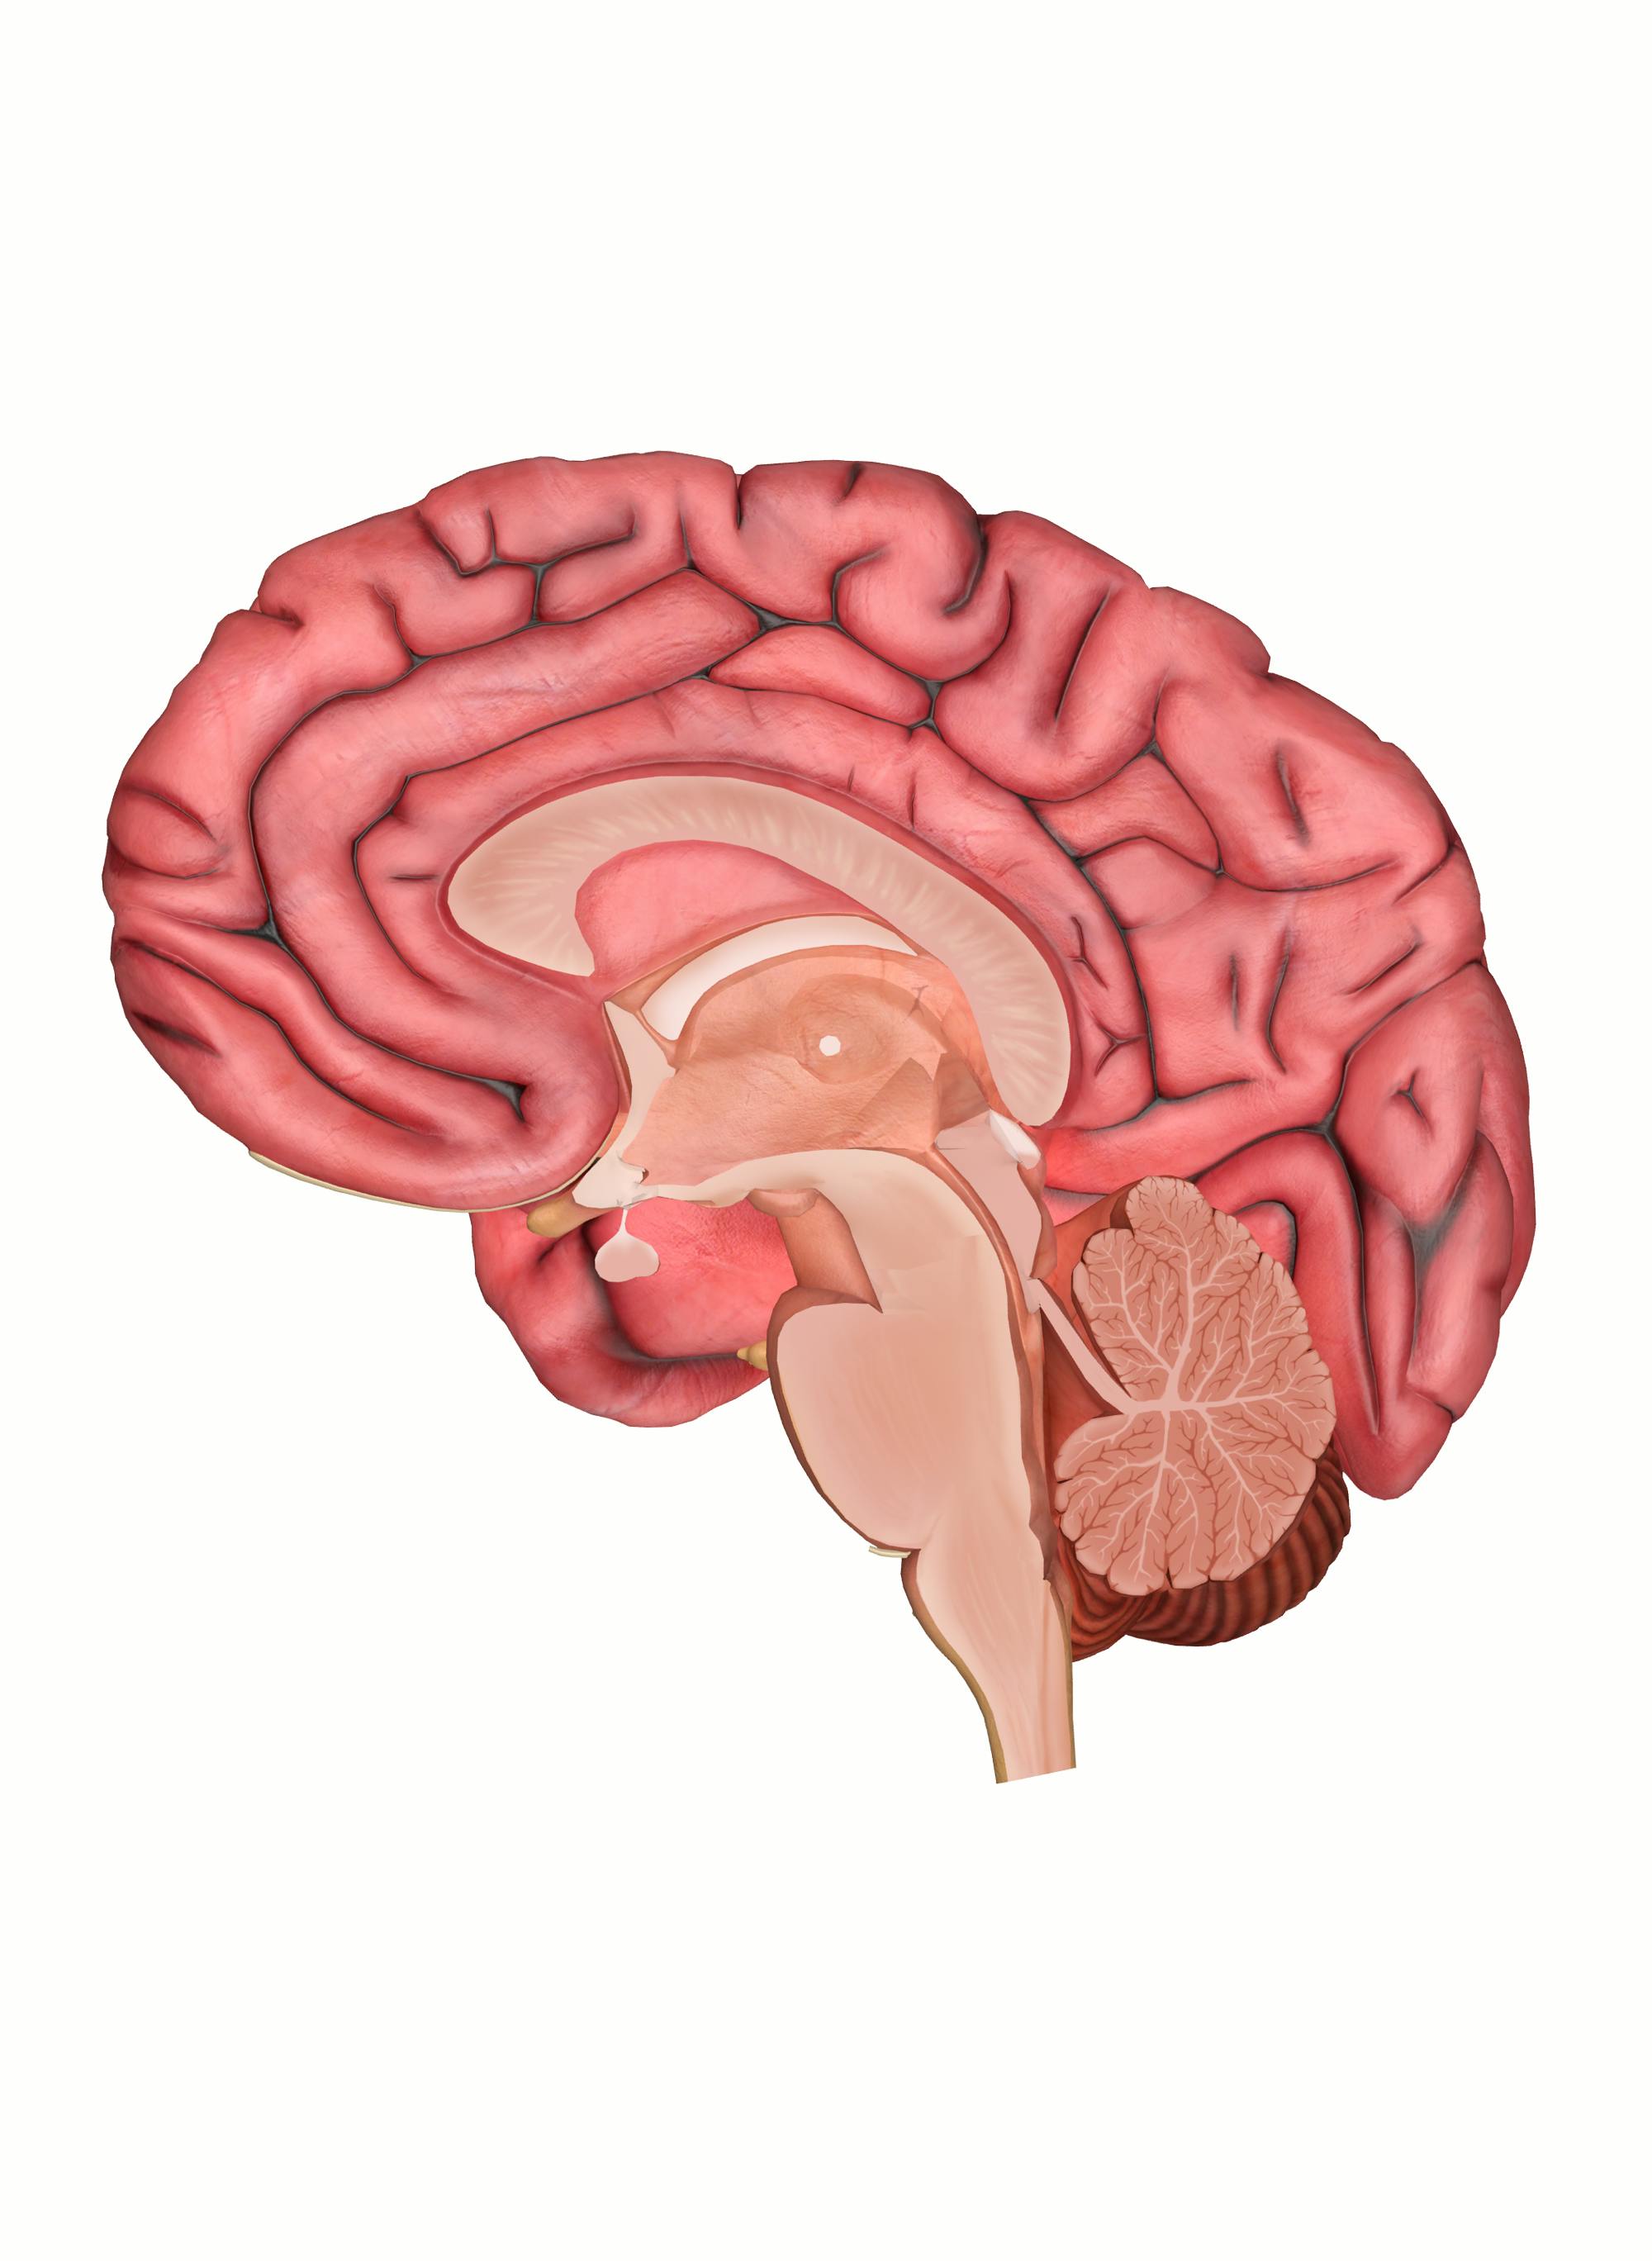 How the Brainstem Controls Involuntary Functions